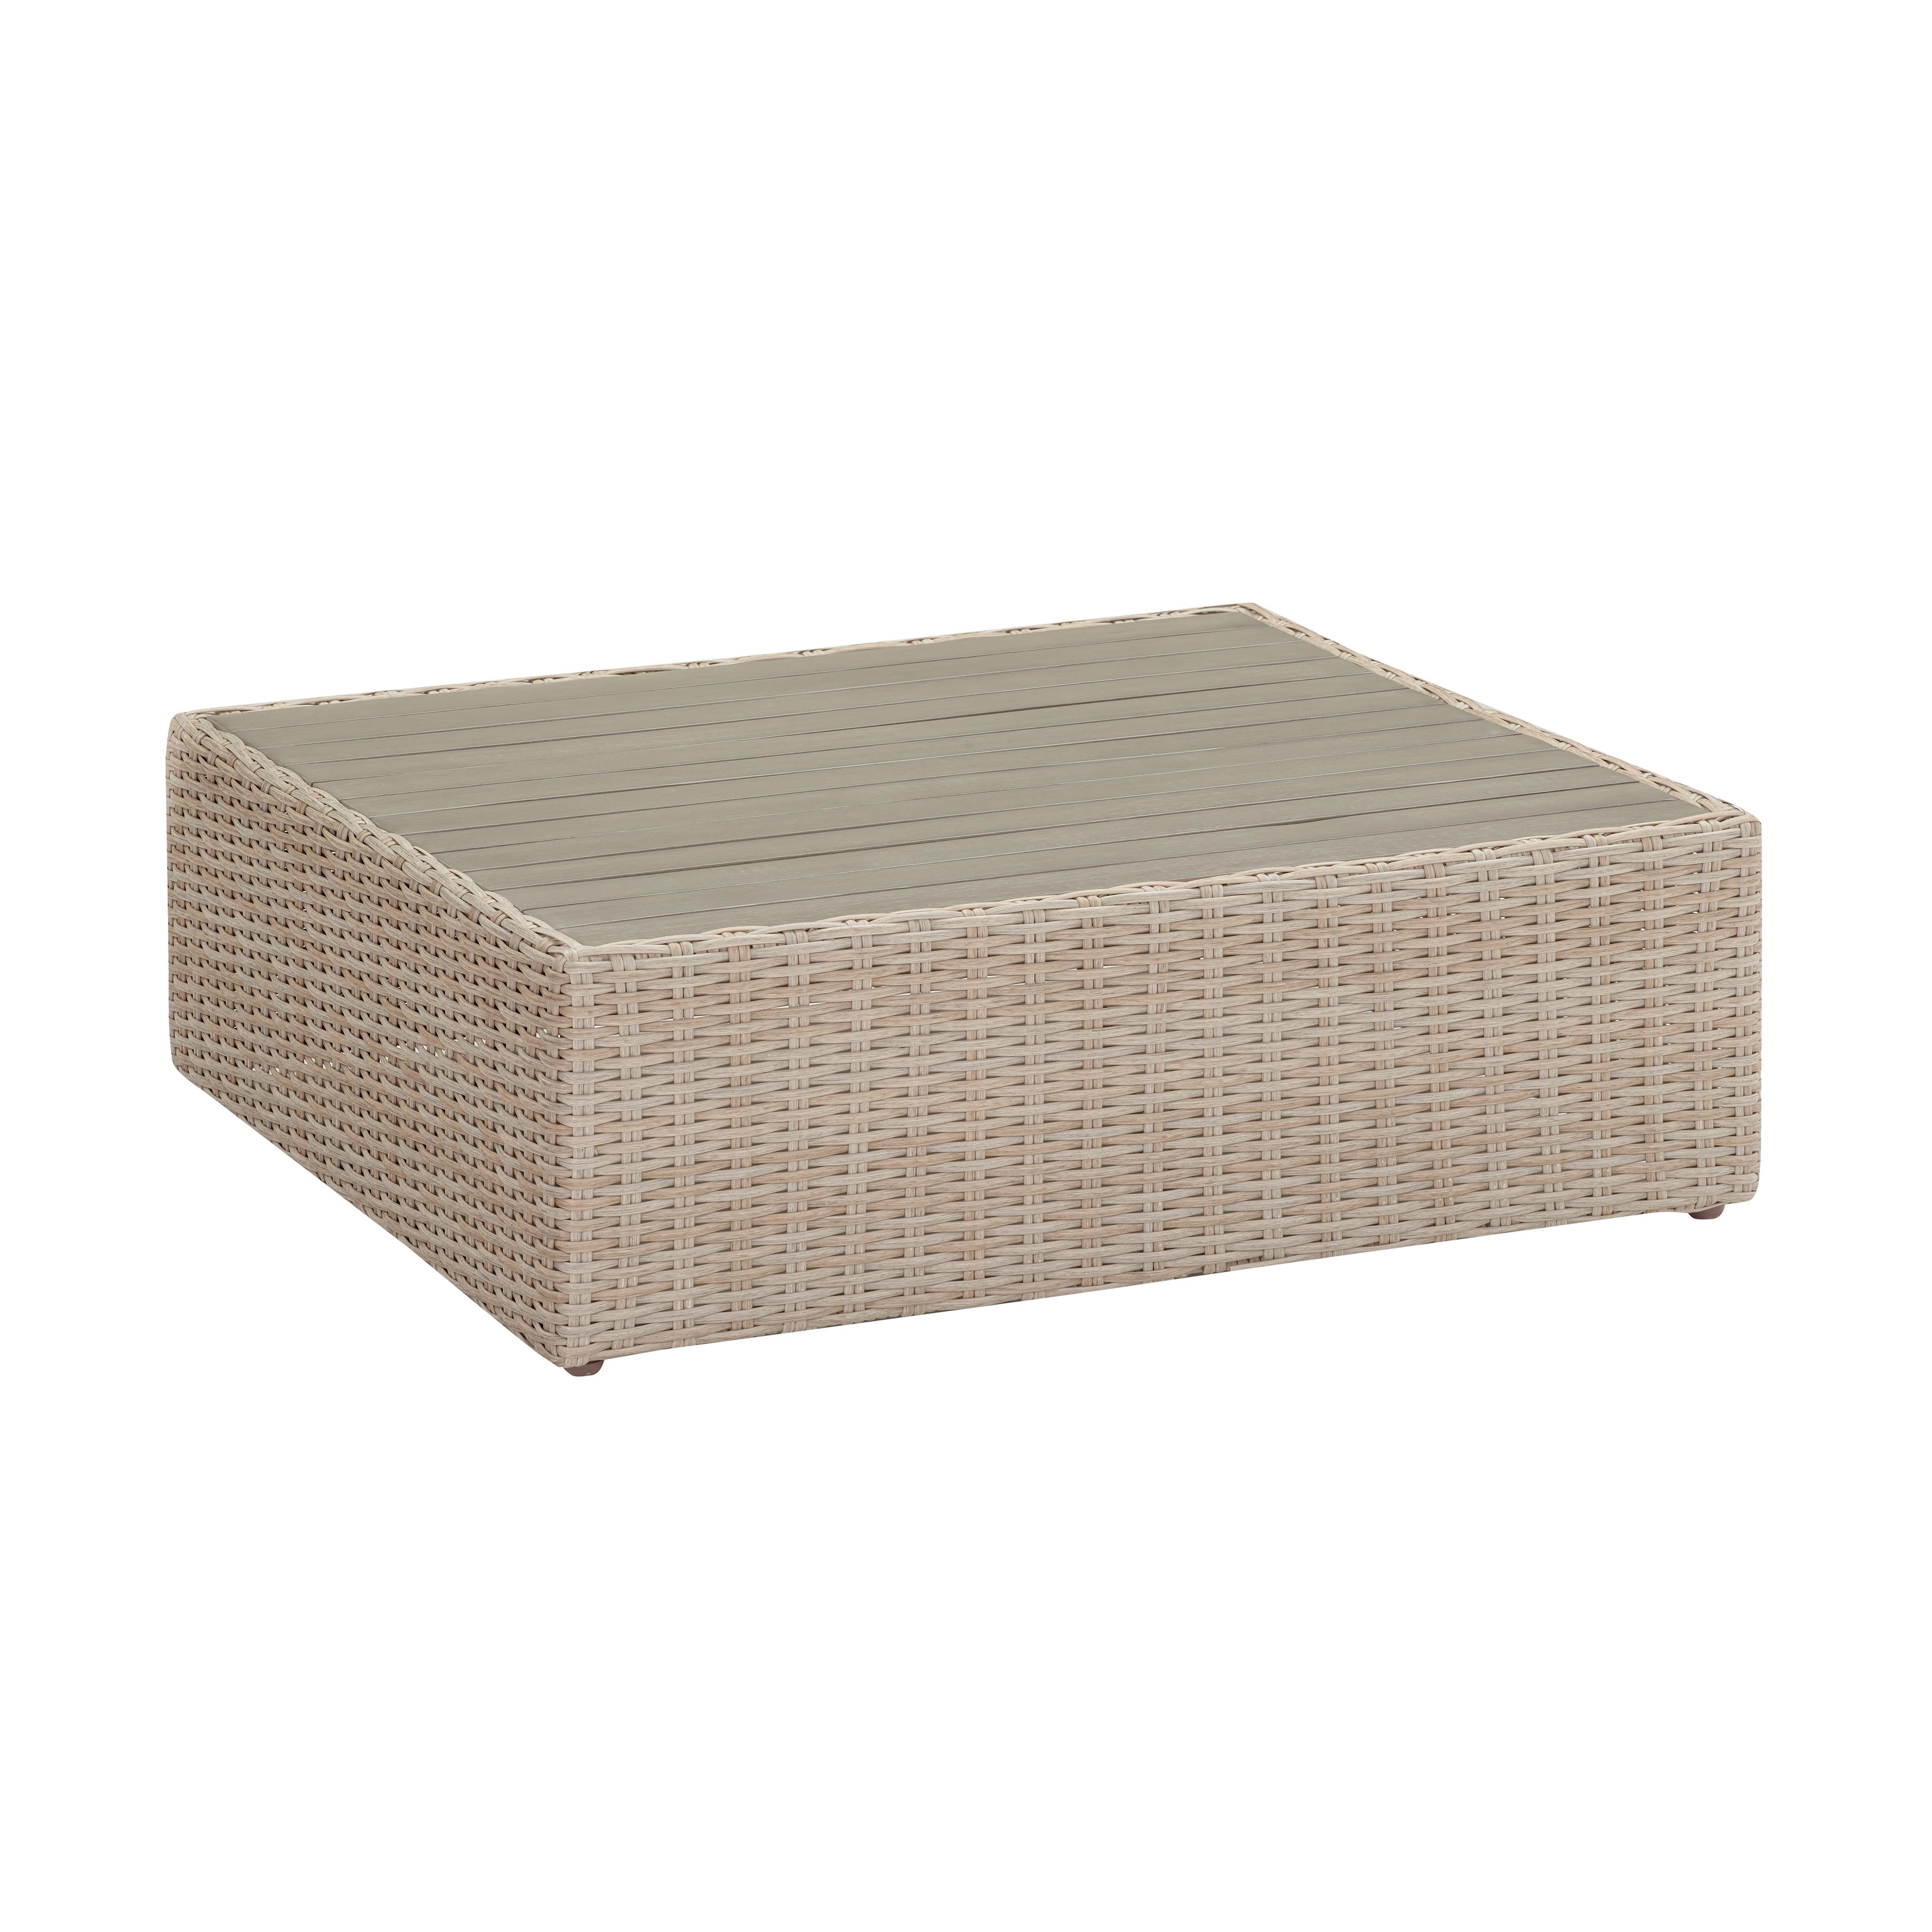 Cali Natural Wicker Outdoor Ottoman - Image 2